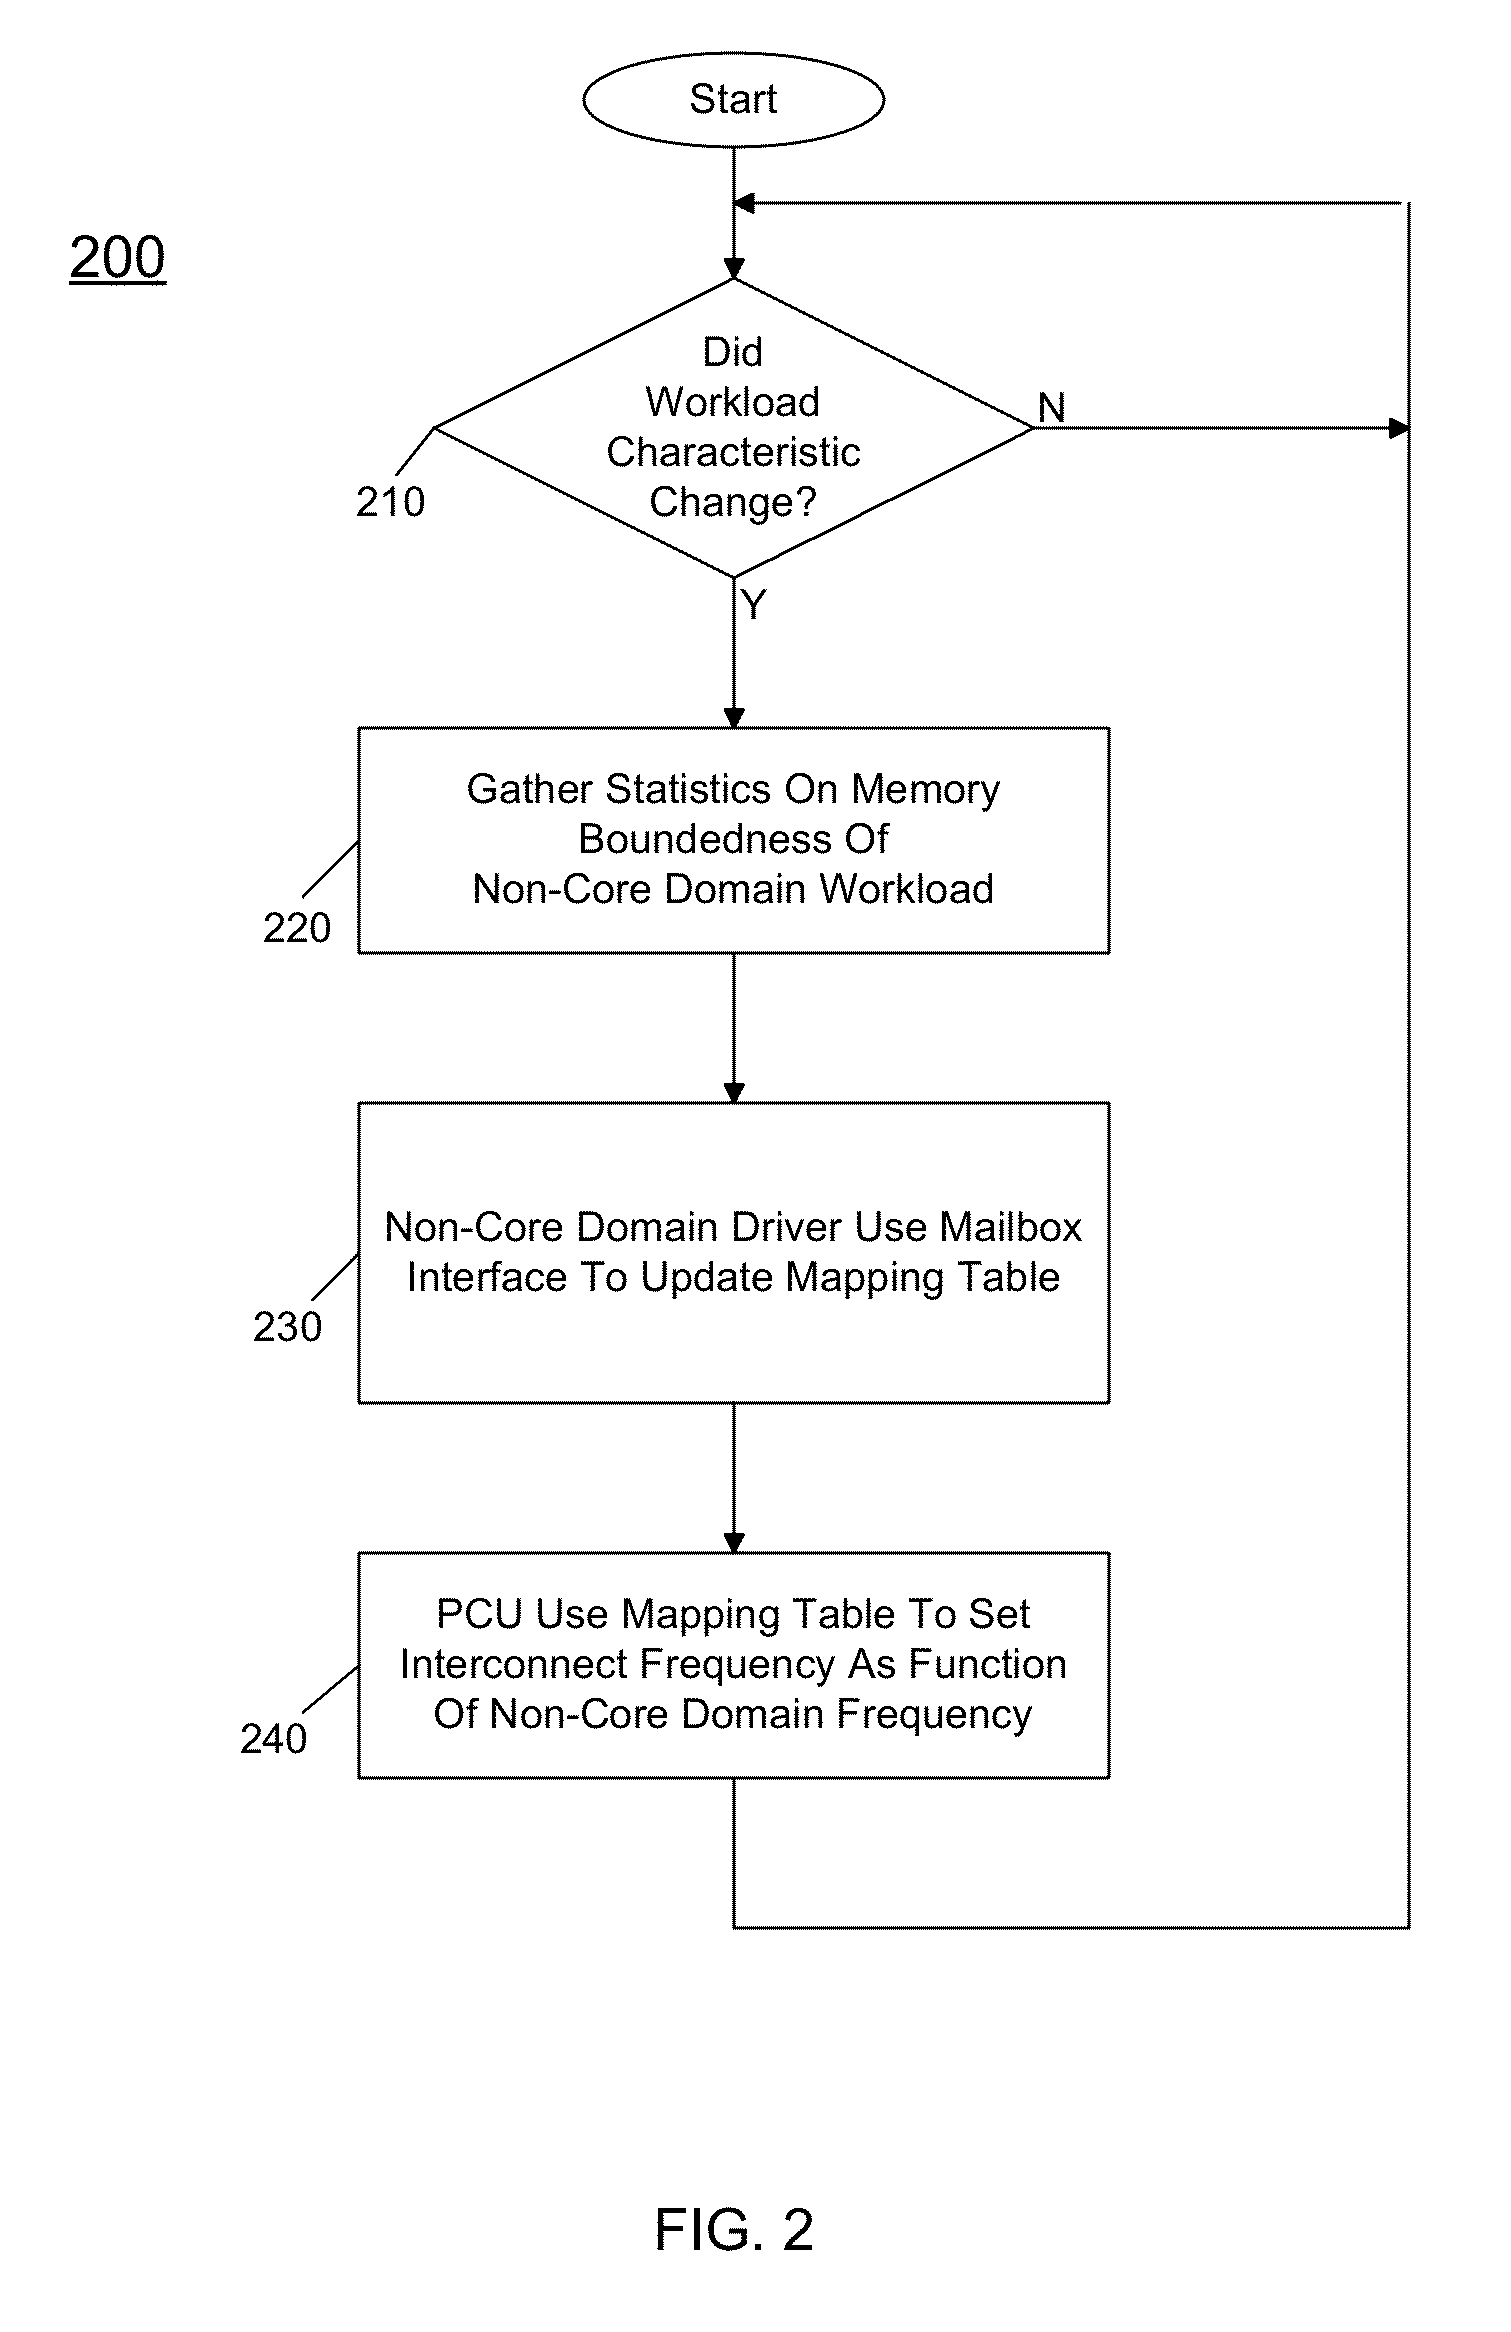 Enabling a non-core domain to control memory bandwidth in a processor